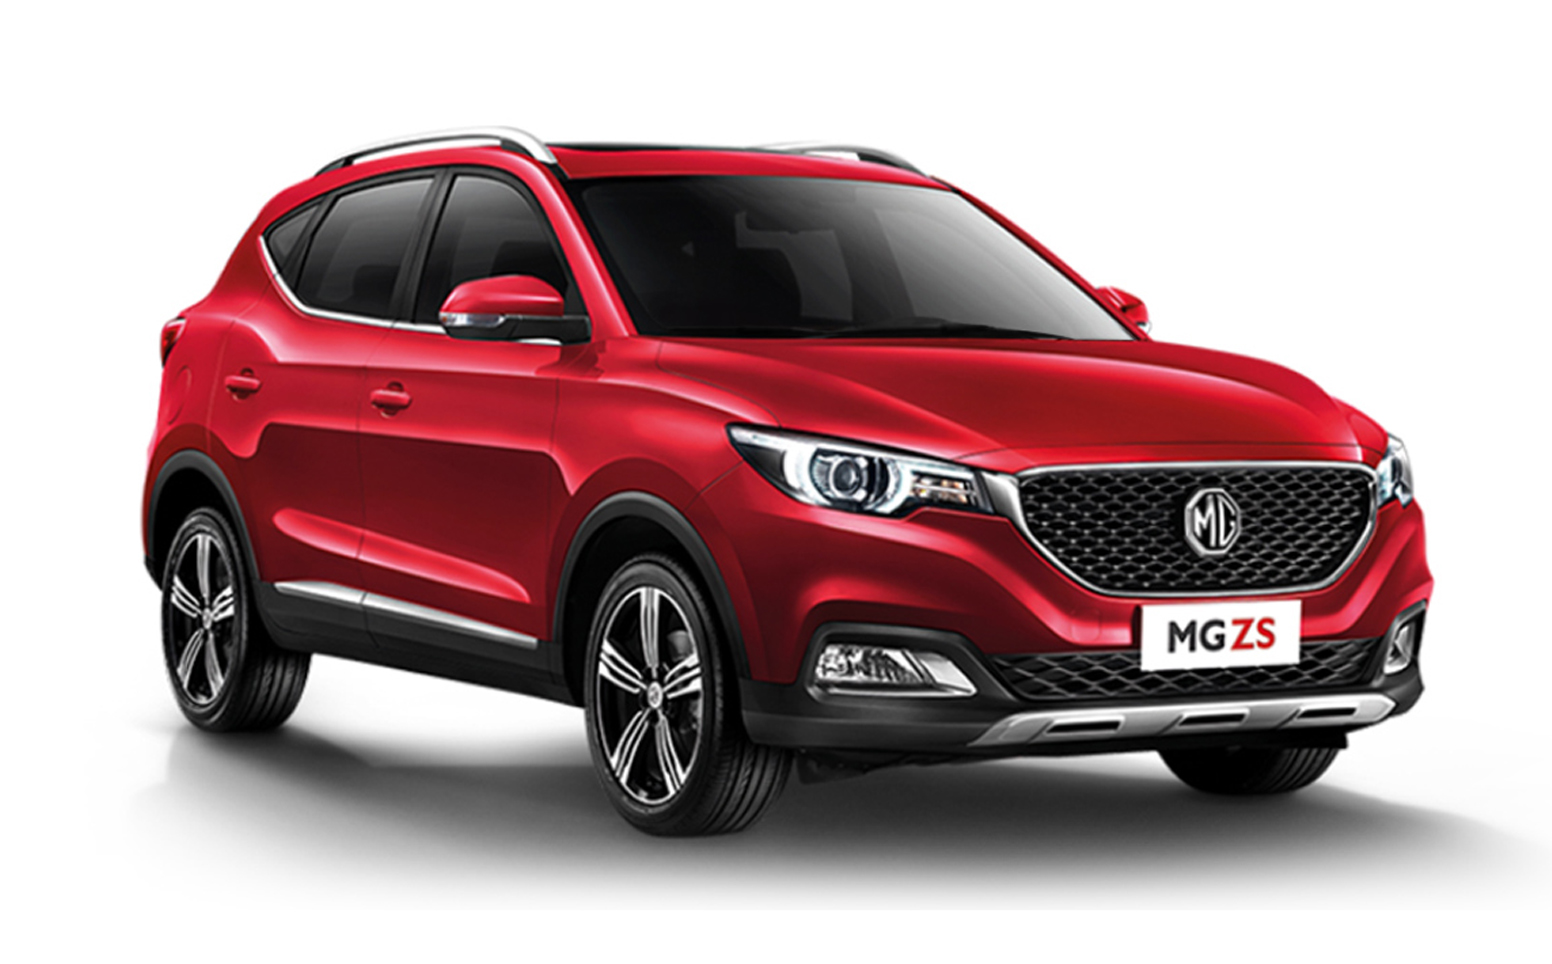 mg_zs_10t-4at-2wd-lux